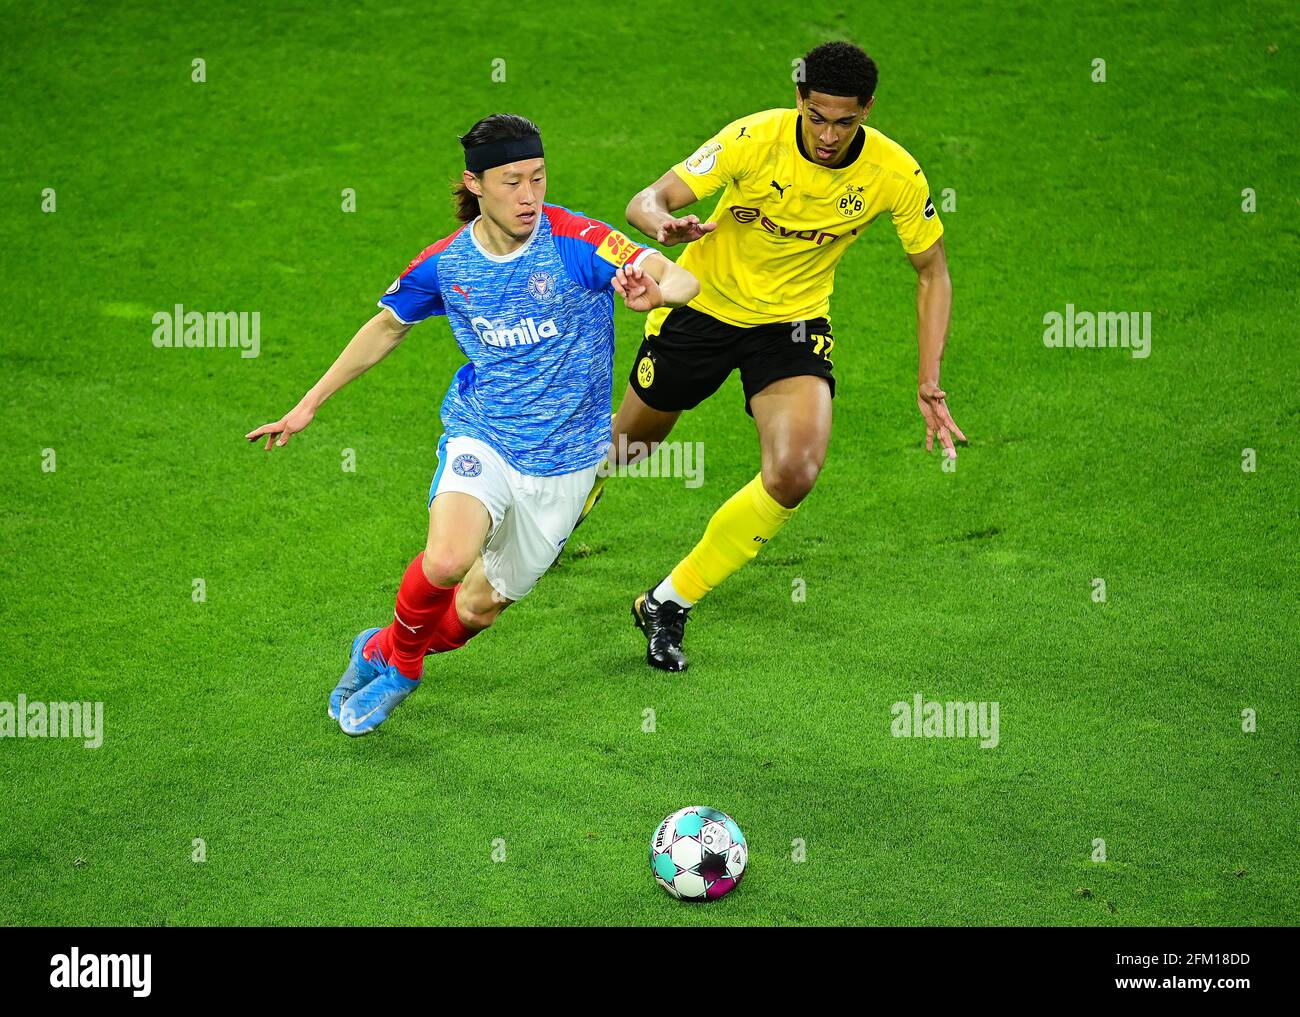 left to right Jae-Sung Lee (KI) and Jude BELLINGHAM (DO), action, duels, football DFB Pokal, semi-finals, Borussia Dortmund (DO) - Holstein Kiel (KI) 5: 0, on May 1st, 2021 in Dortmund/Germany . Photo: TimGroothuis/Witters/pool via Fotoagentur SVEN SIMON # DFB regulations prohibit any use of photographs as image sequences and/or quasi-video # Editorial Use ONLY # National and International News Agencies OUT | usage worldwide Stock Photo